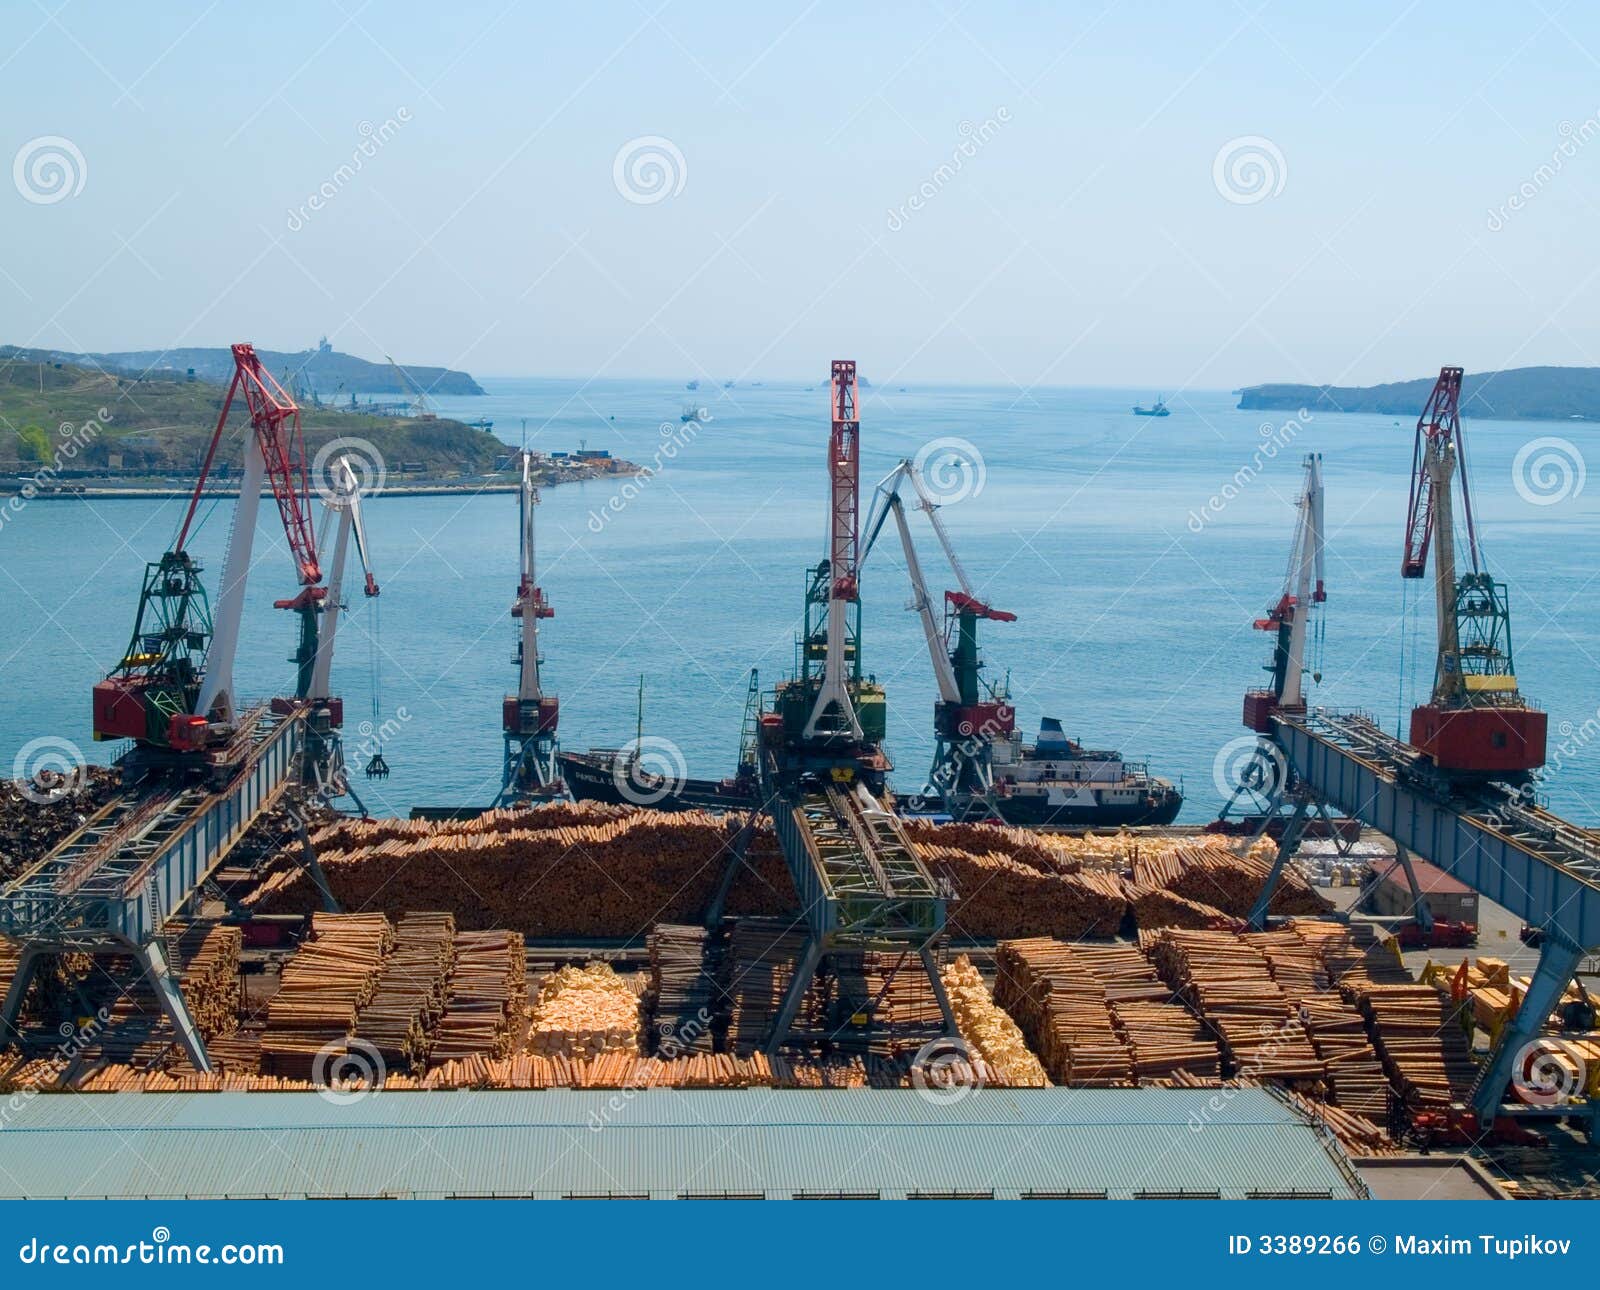 timber export at cargo port stock photo - image of